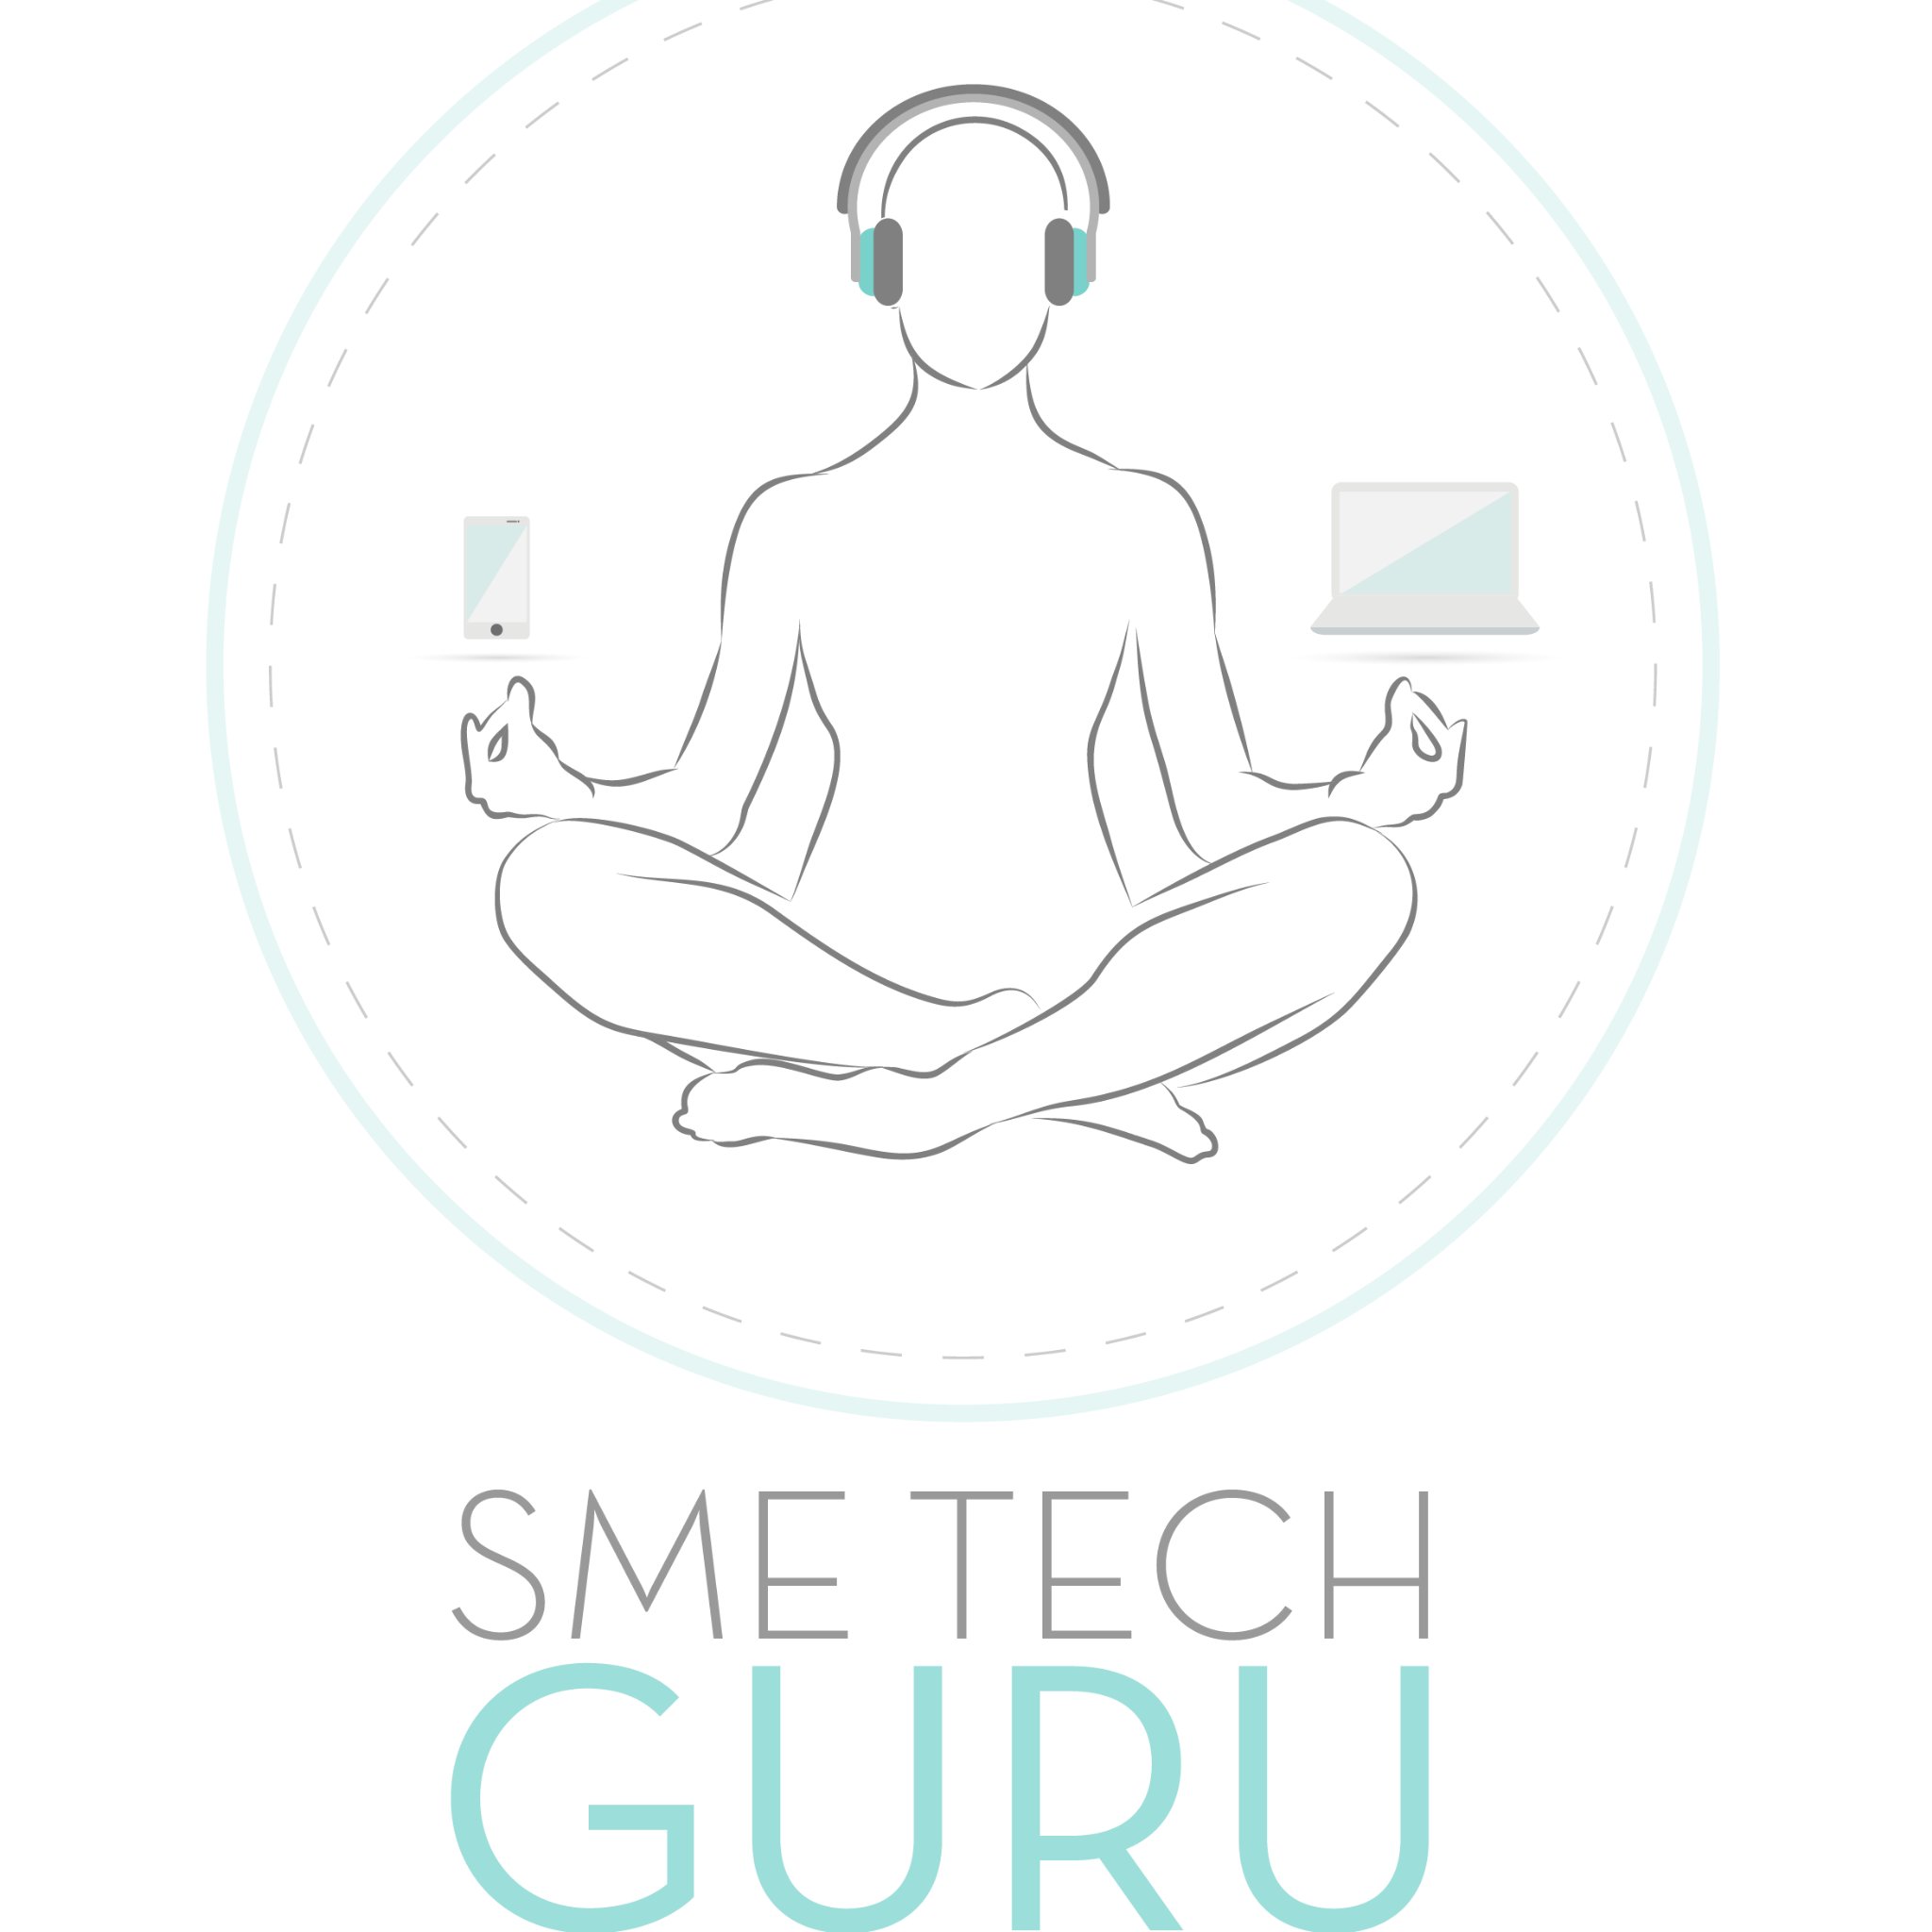 SME Tech Guru is South Africa’s latest tech blog that focuses on technology and its role in helping businesses grow and succeed. https://t.co/GAWHxiLoef